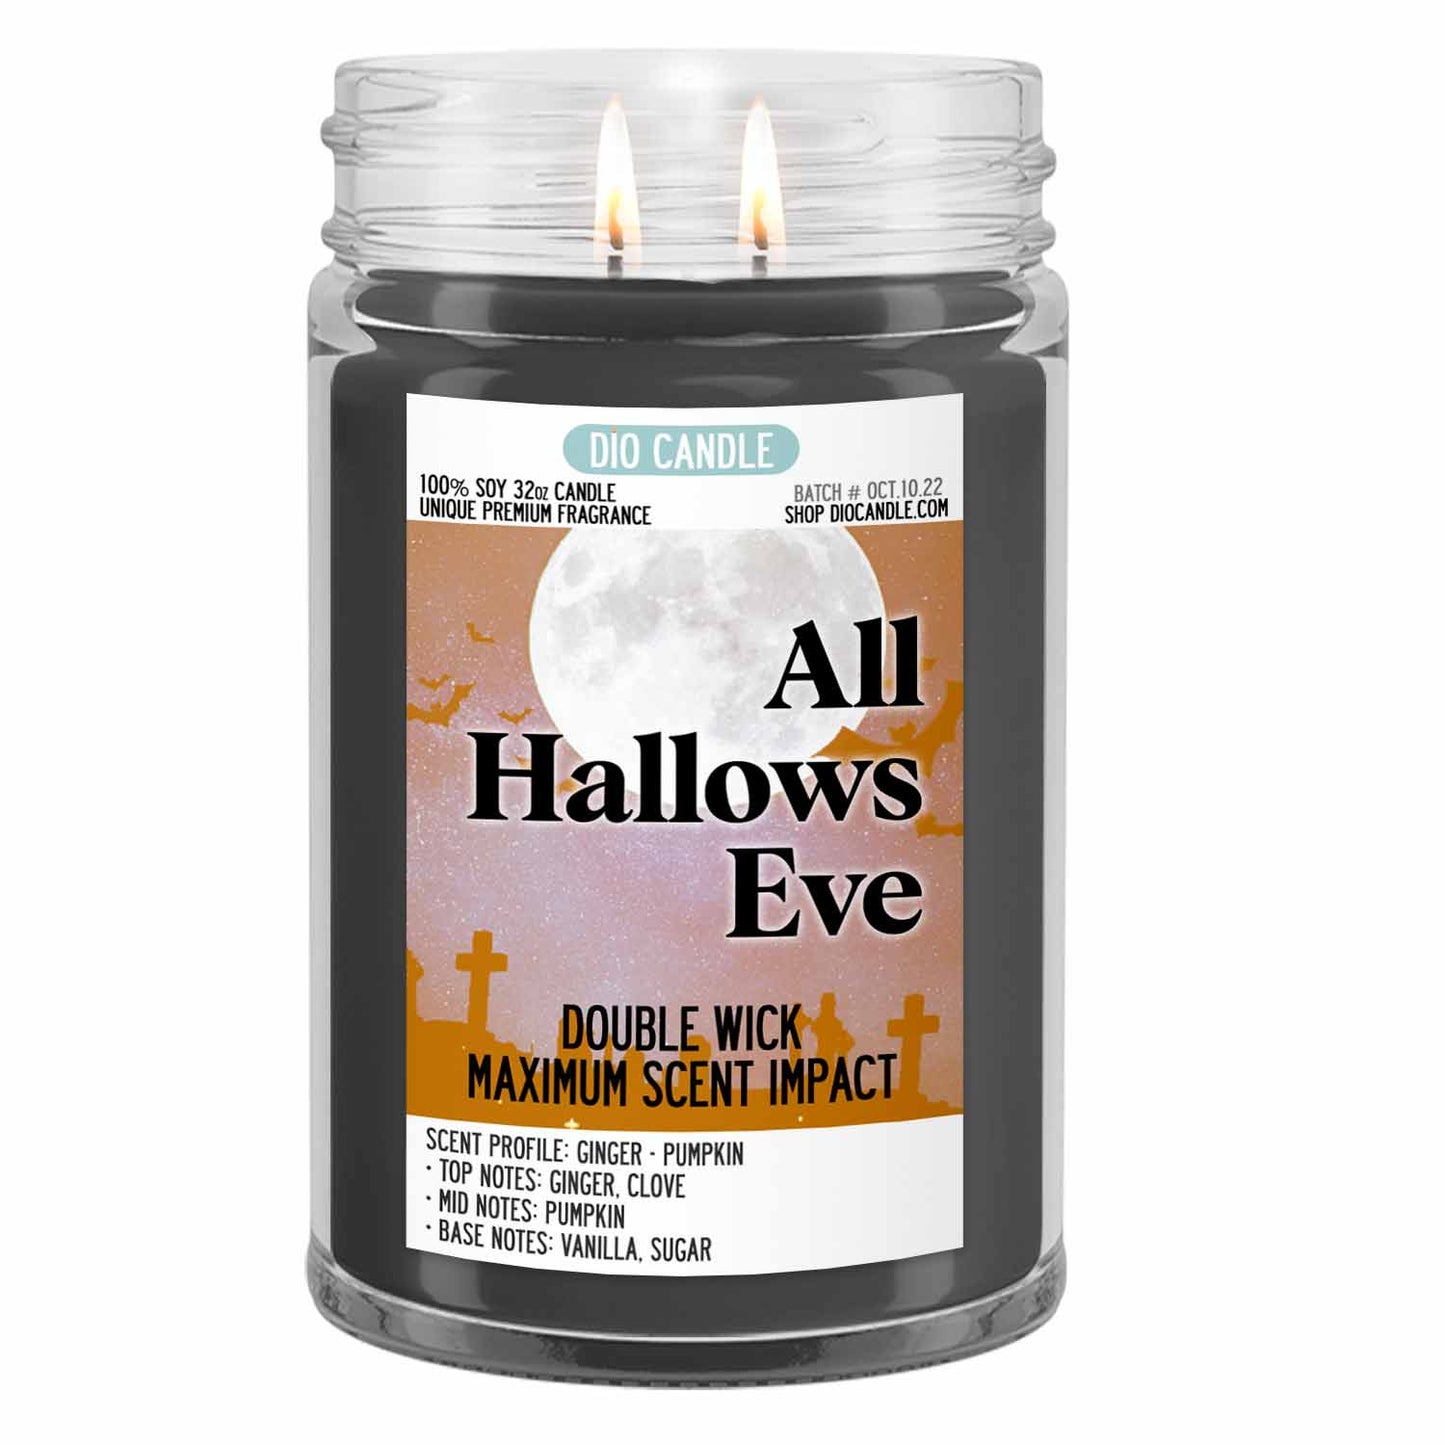 All Hallows Eve Candle